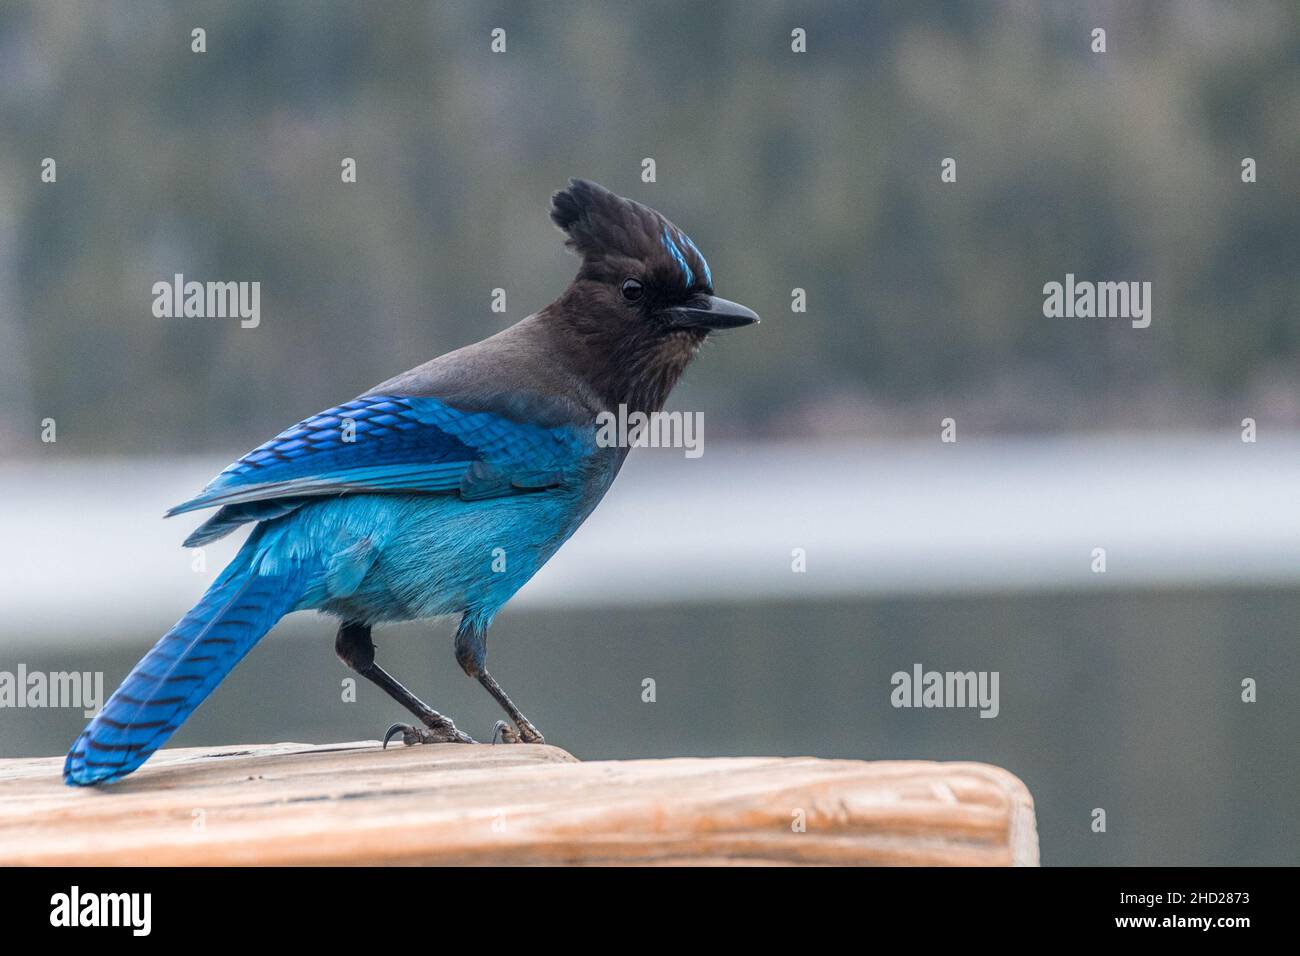 Closeup shot of a blue Steller's jay on a blurred background Stock Photo